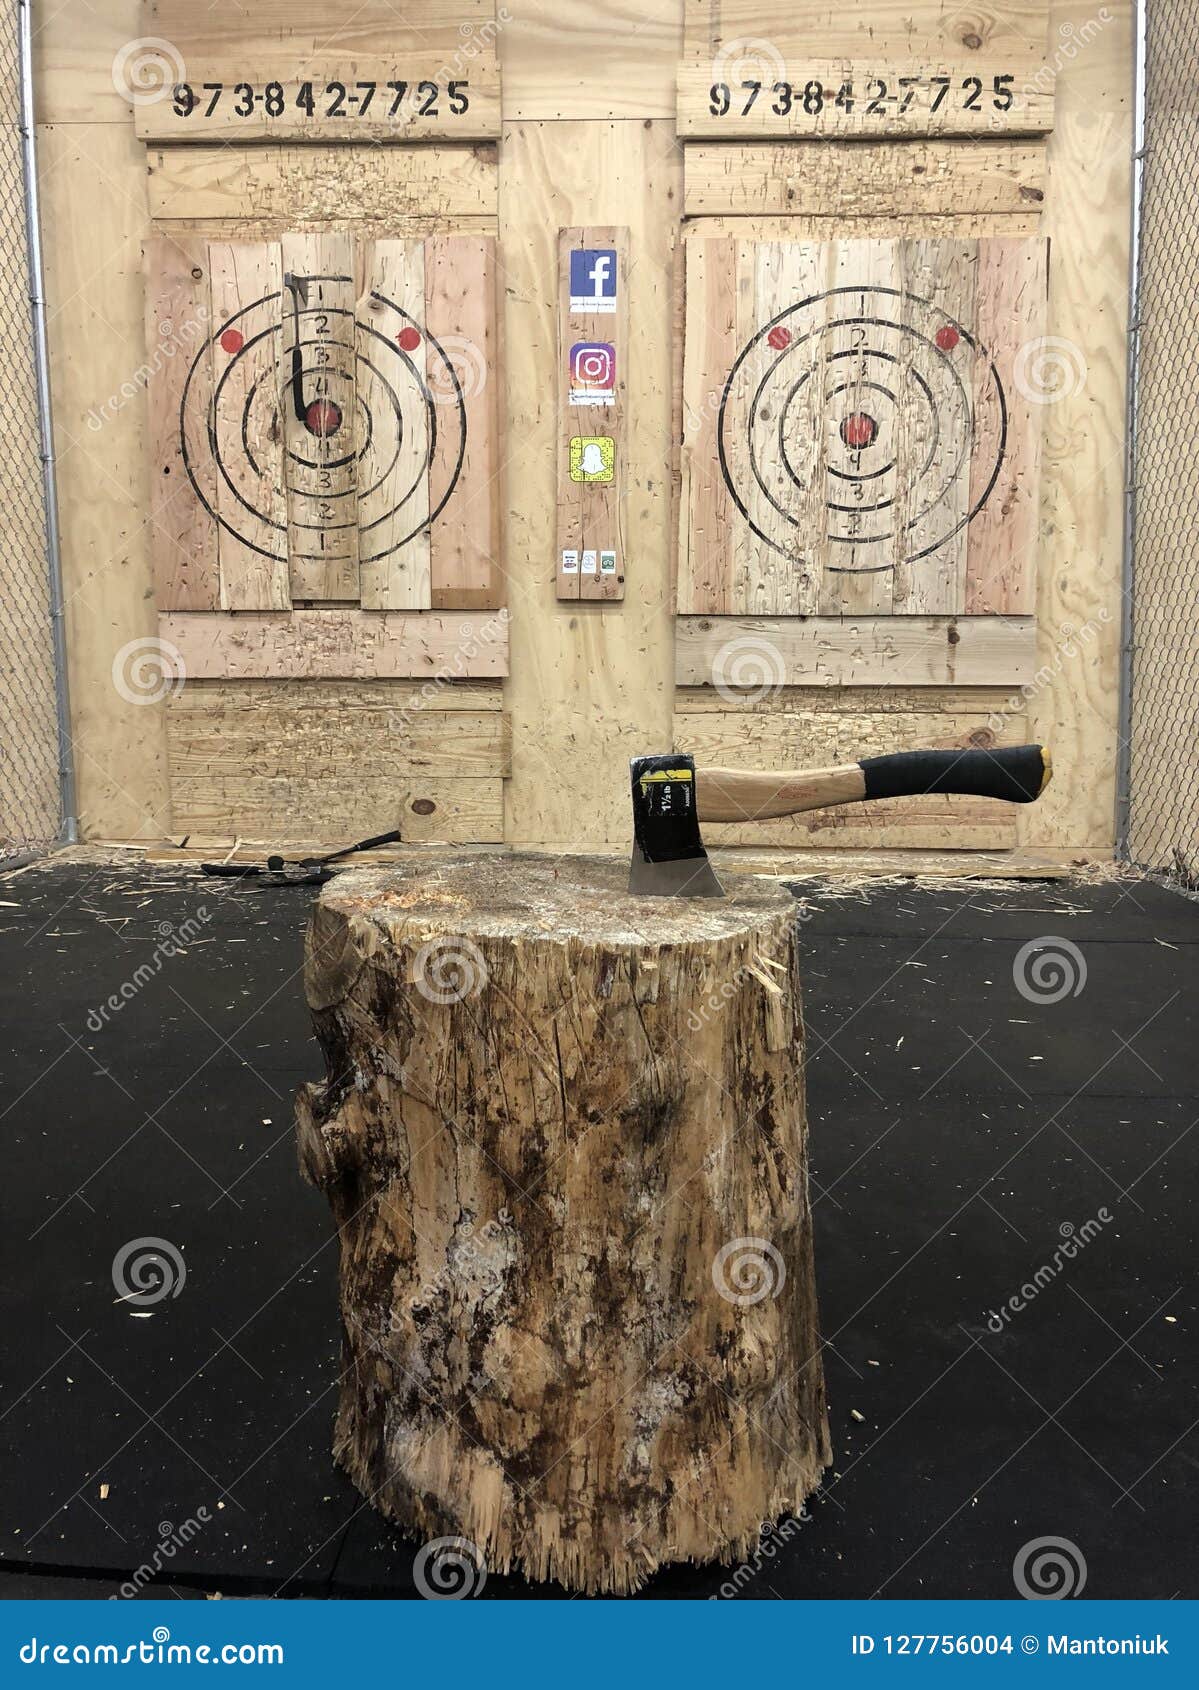 List 96+ Images bury the hatchet bloomfield – axe throwing Excellent